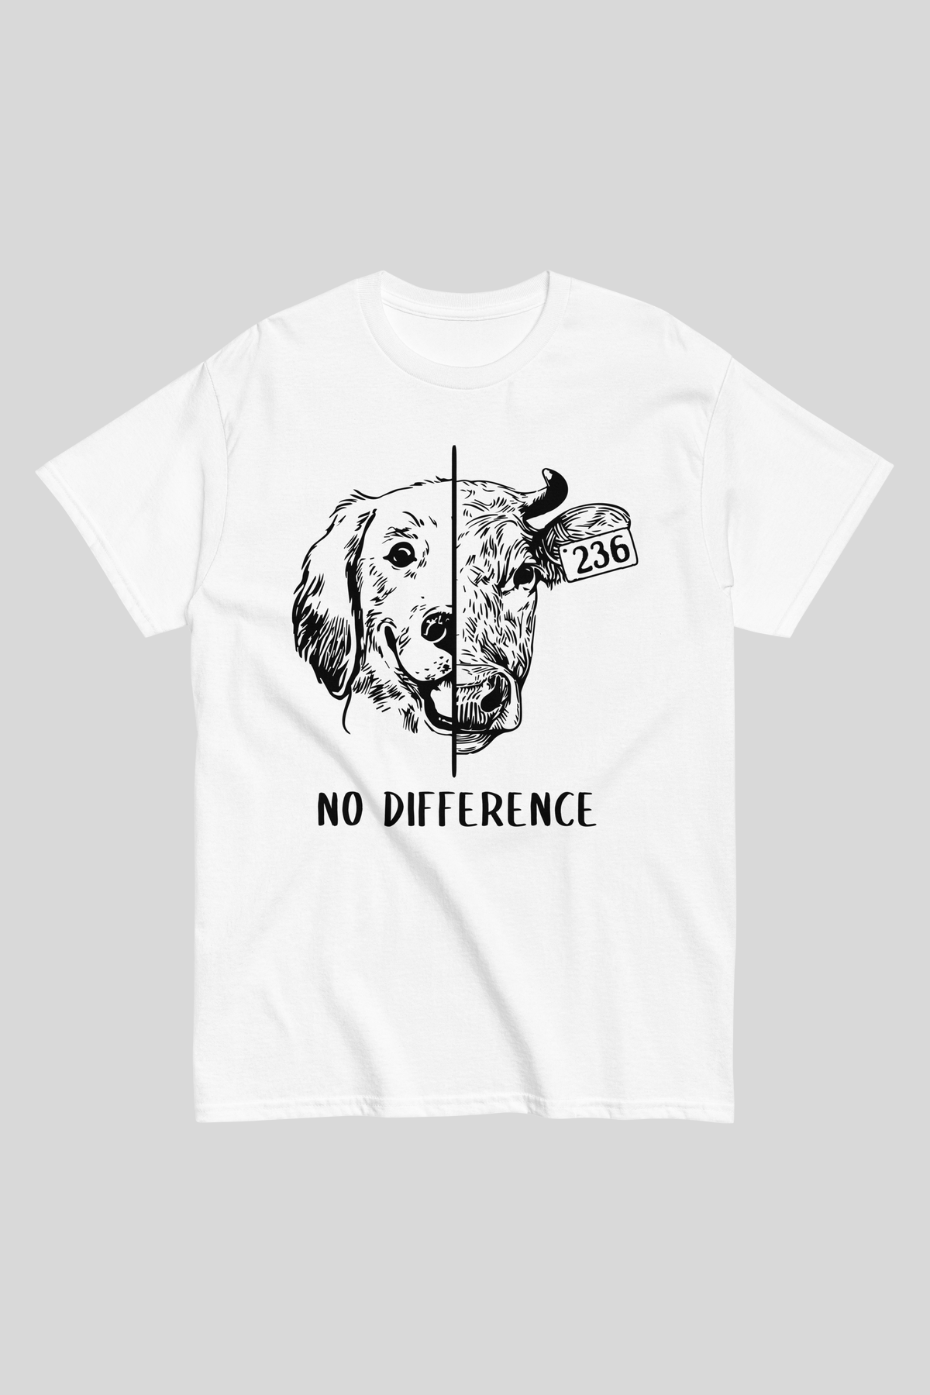 No Difference Unisex classic tee